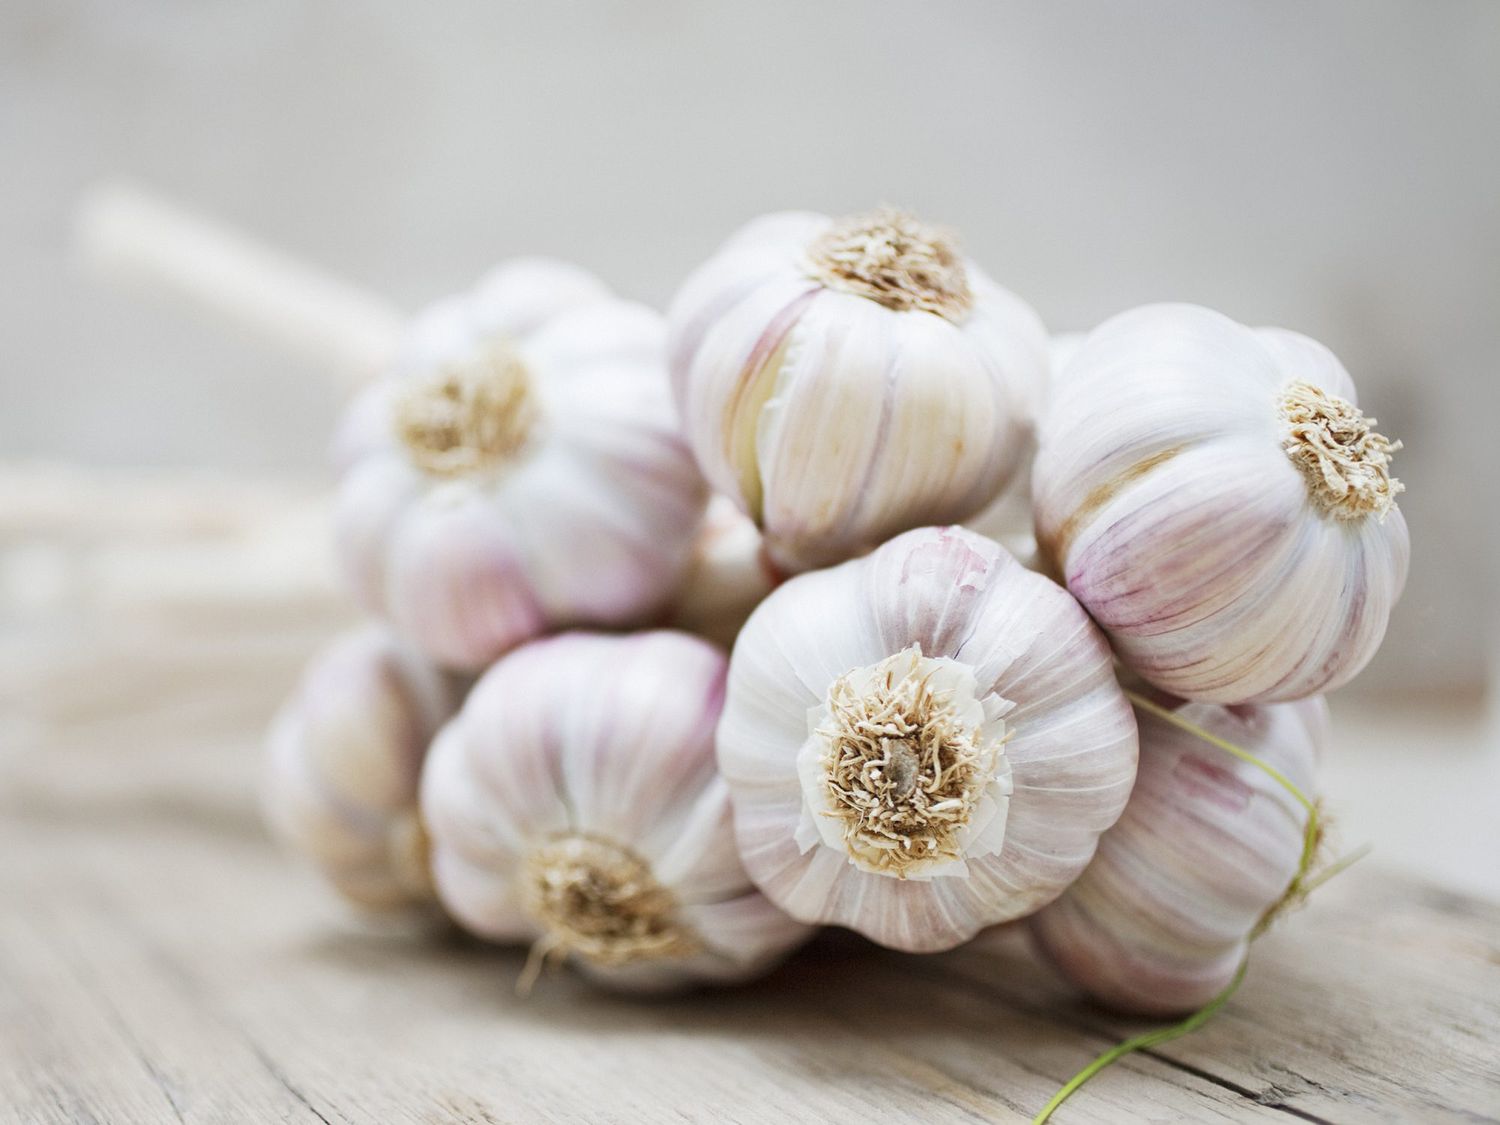 6 Powerful Health Benefits of Garlic | Real Simple